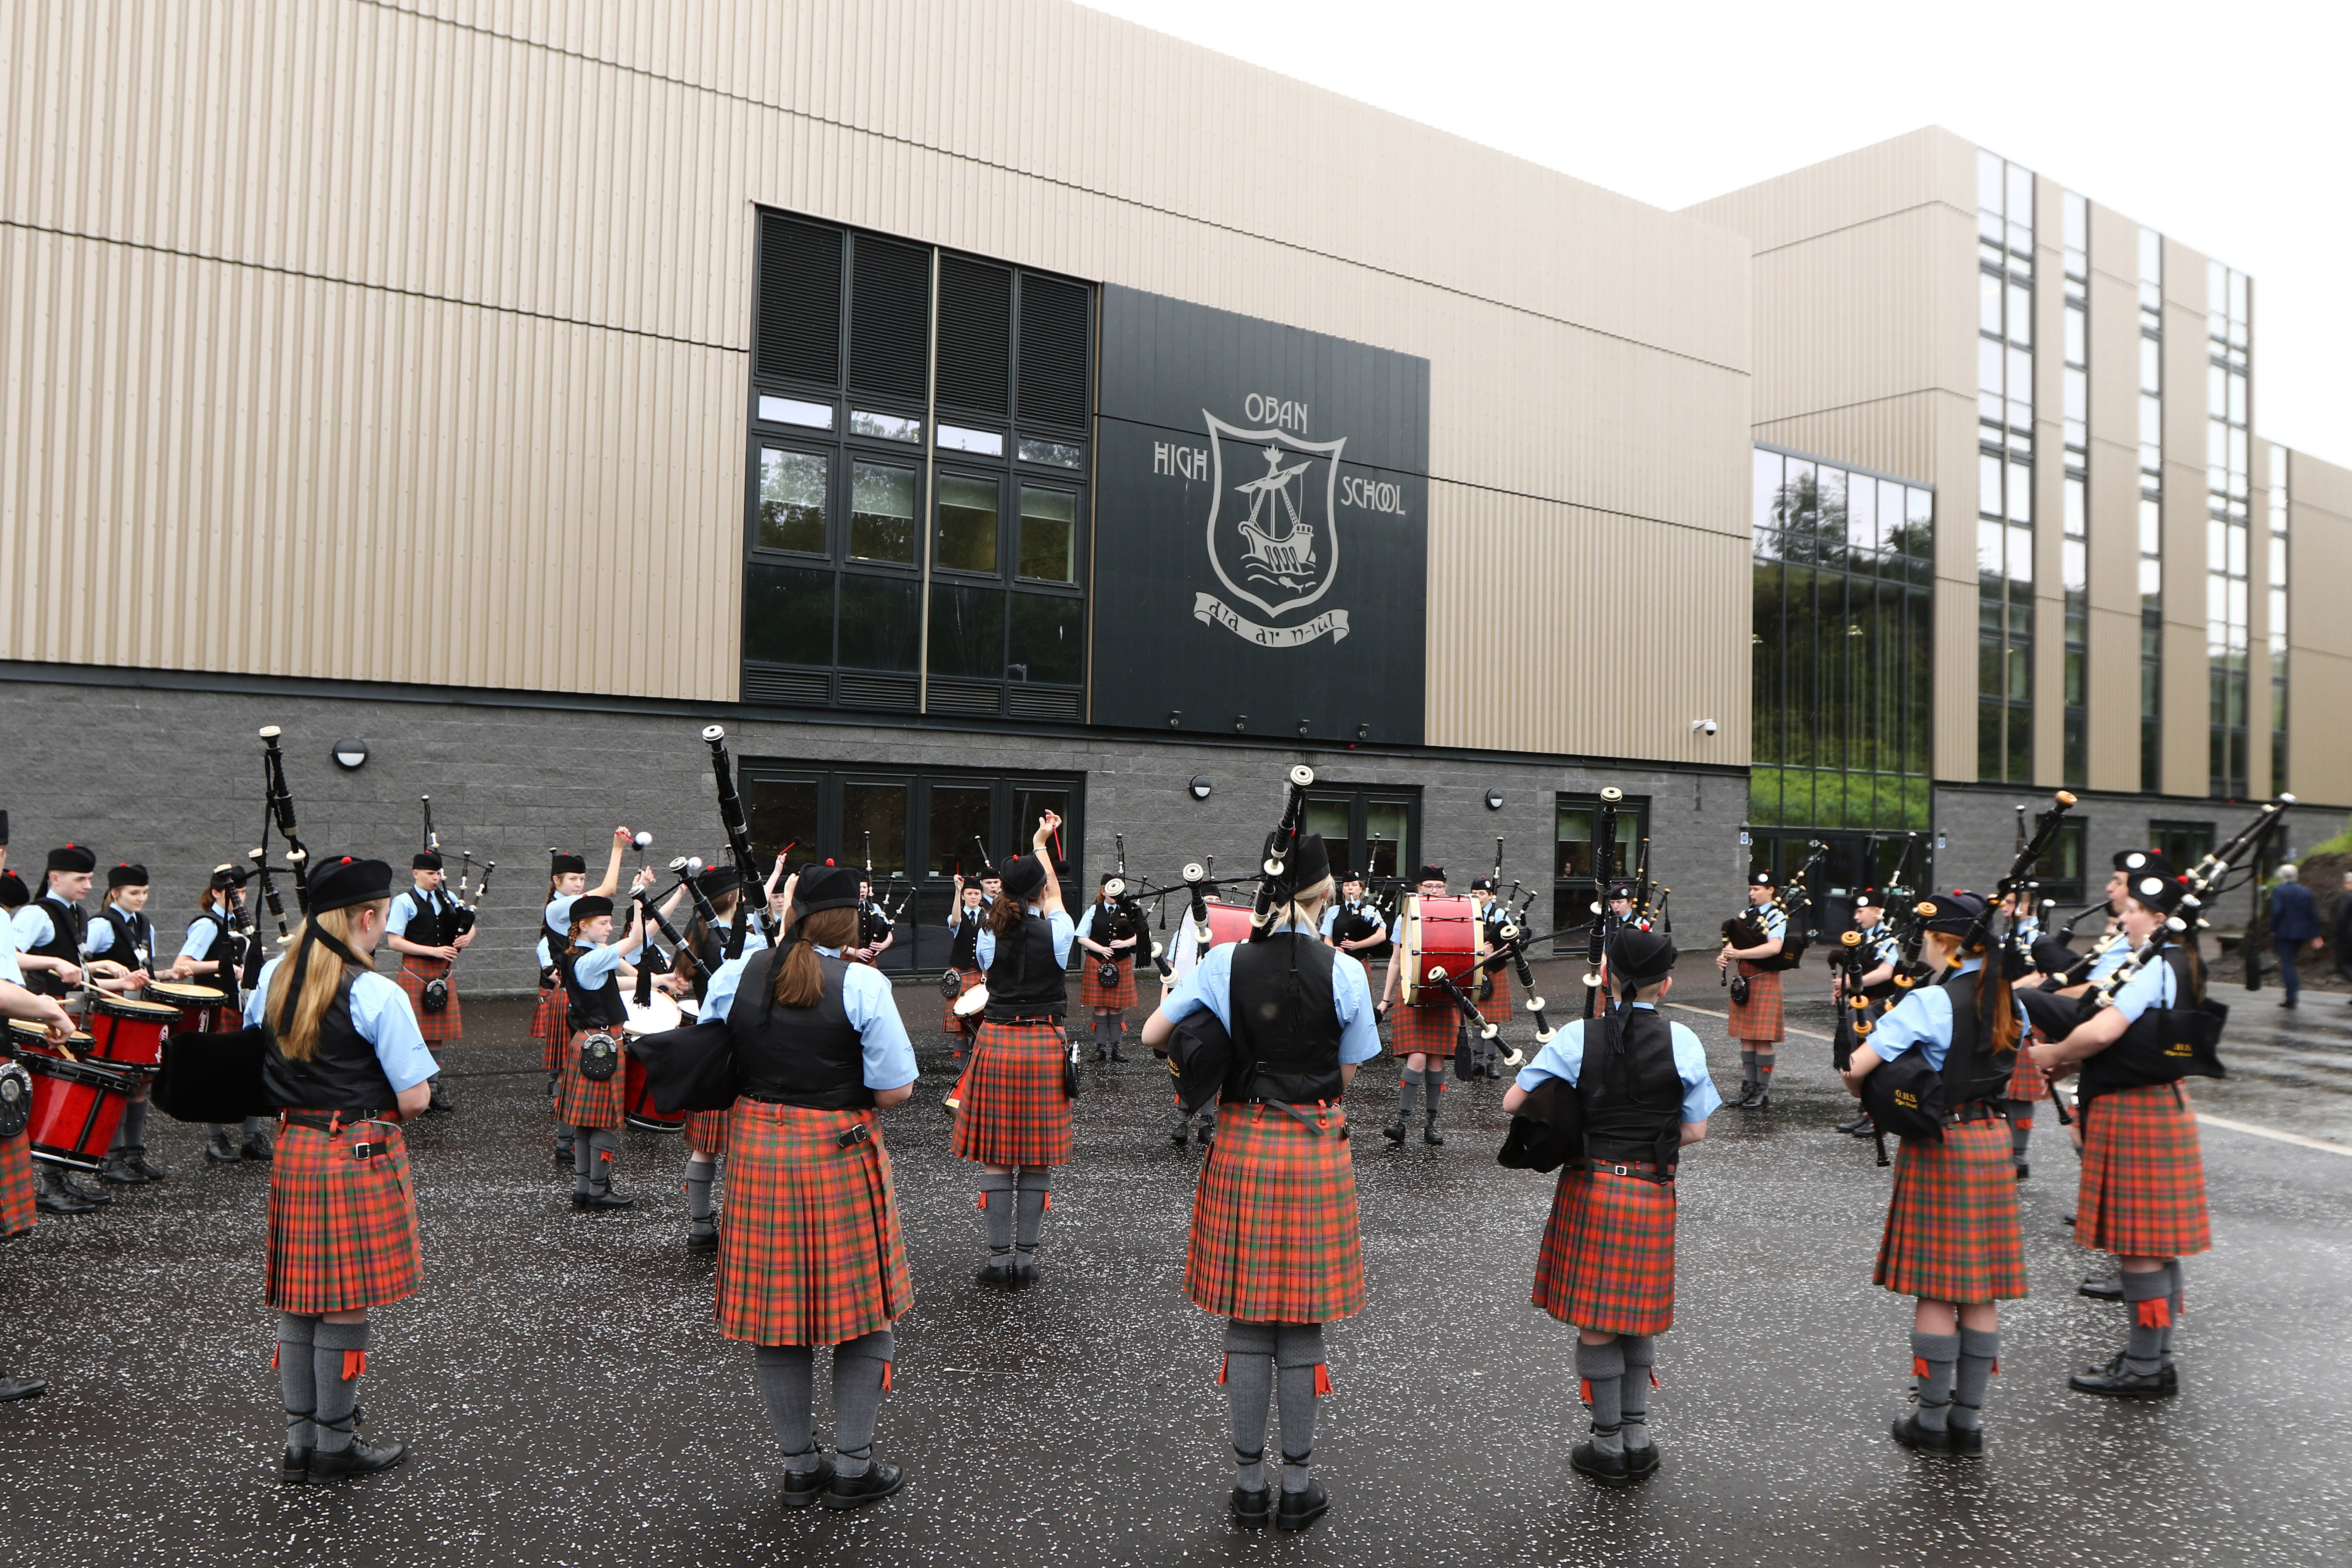 The new Oban High School building was formally opened last year.